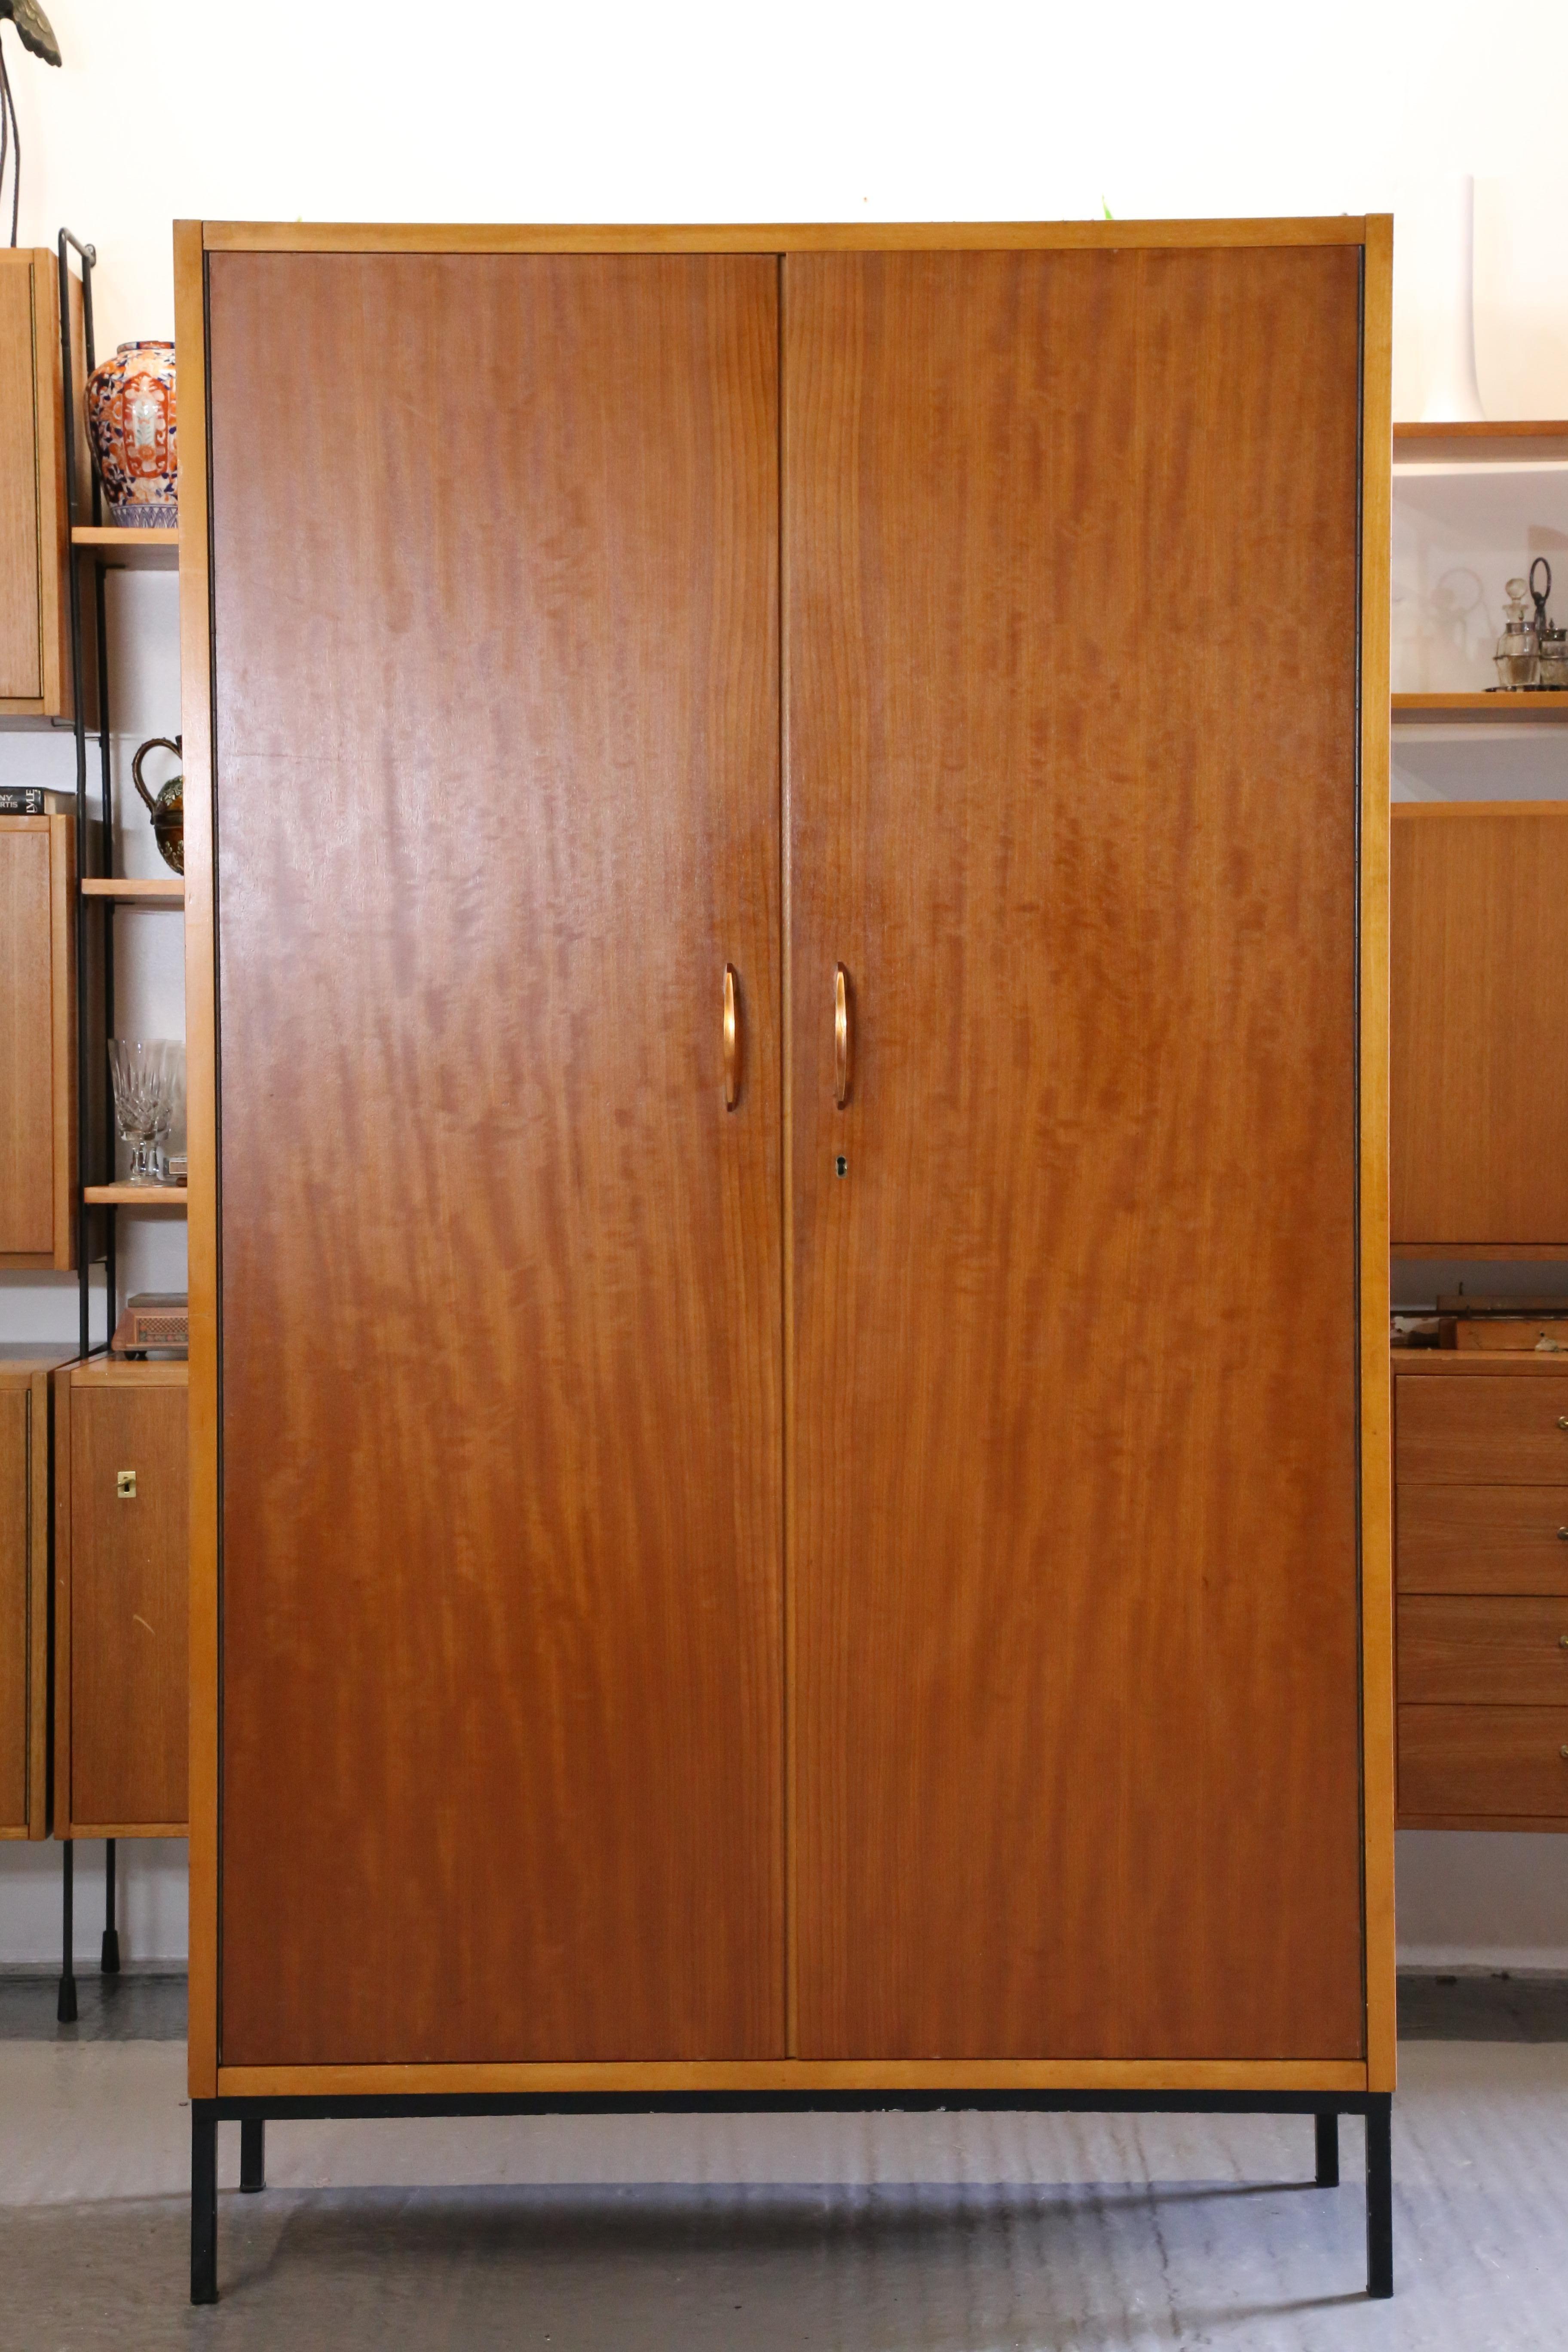 Sophisticated Simplicity: Mid-Century Modern Italian Walnut & Maple Wardrobe / Armoire On Stand by Dal Vera

Elevate your space with the timeless elegance of the Mid-Century Modern Italian Walnut & Maple Cupboard On Stand crafted by the esteemed